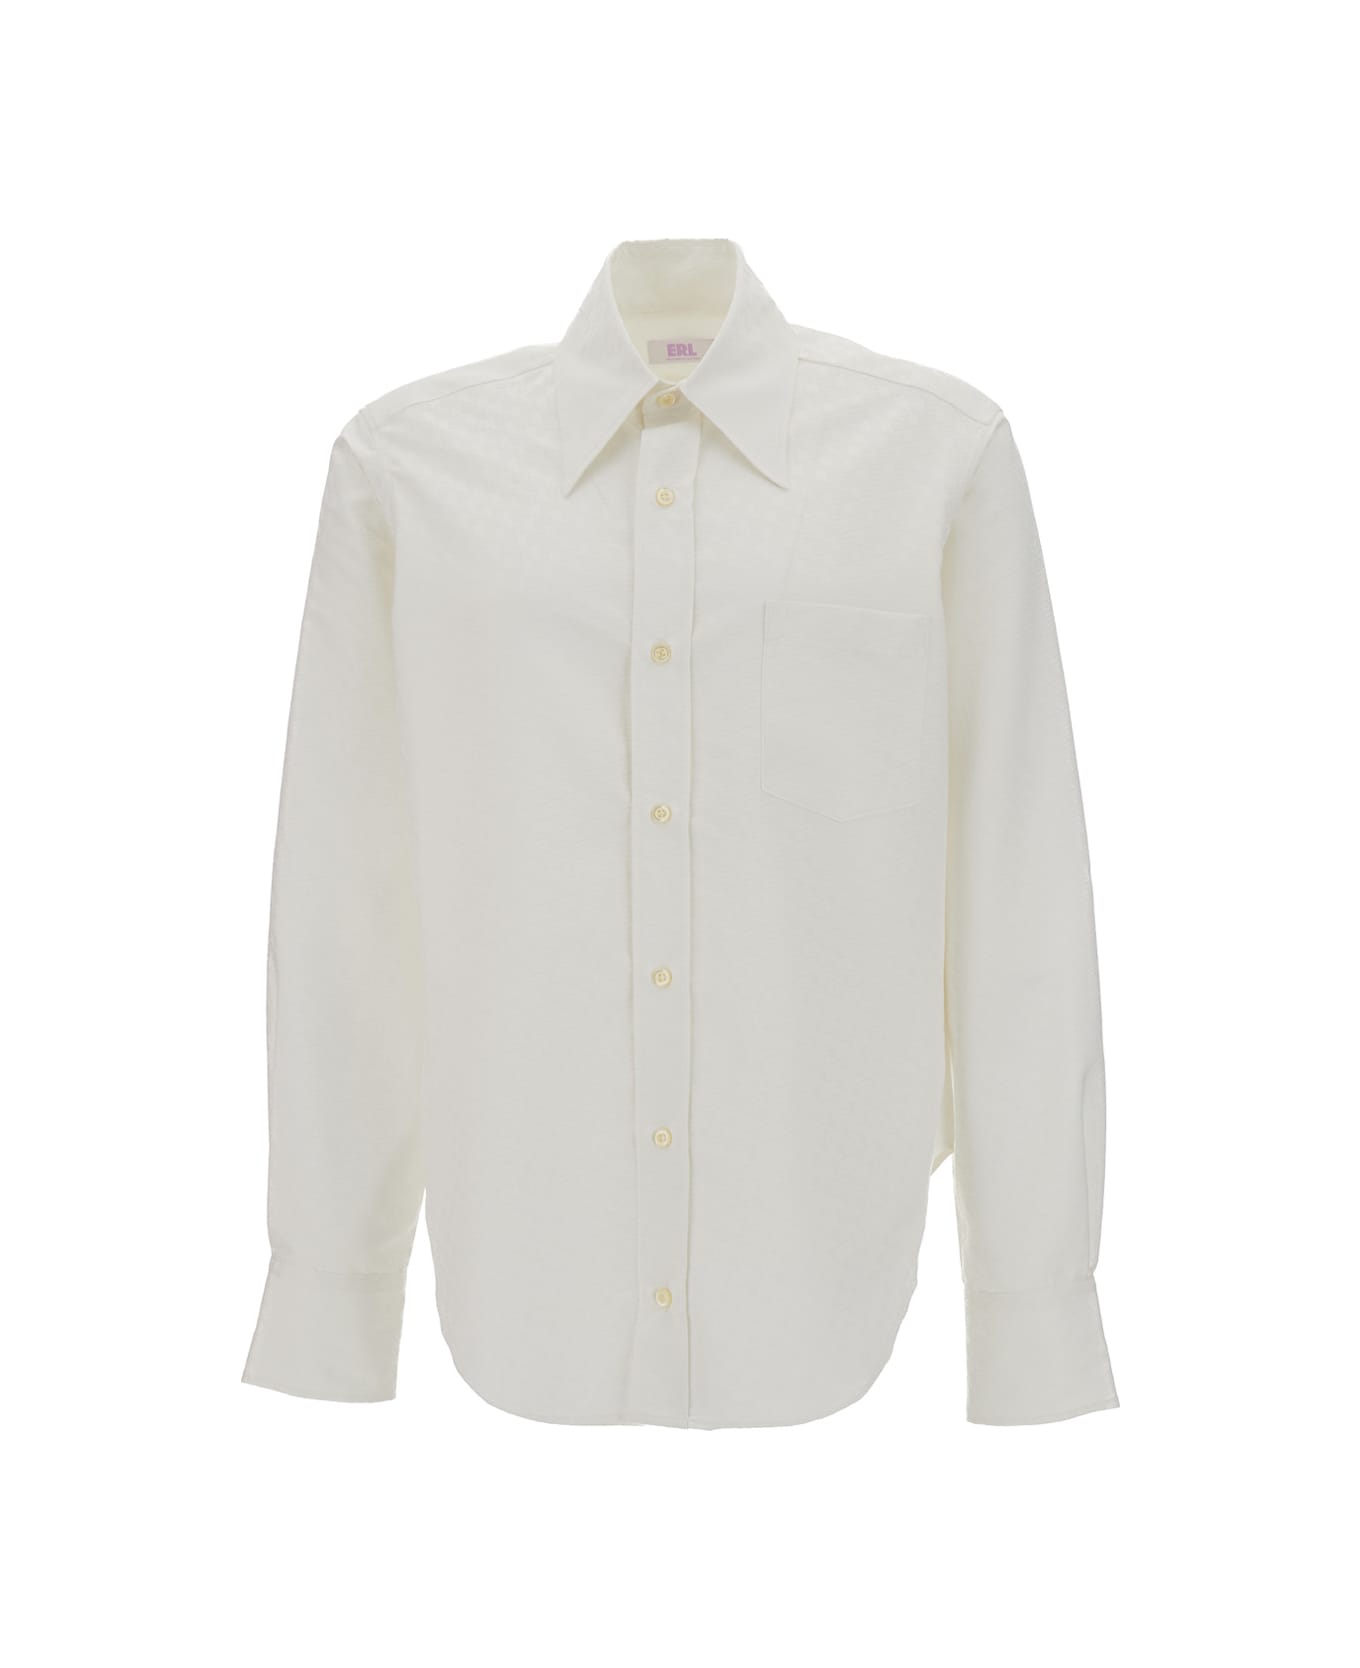 ERL White Buttoned Up Oversize Shirt In Polyester Unisex - White シャツ